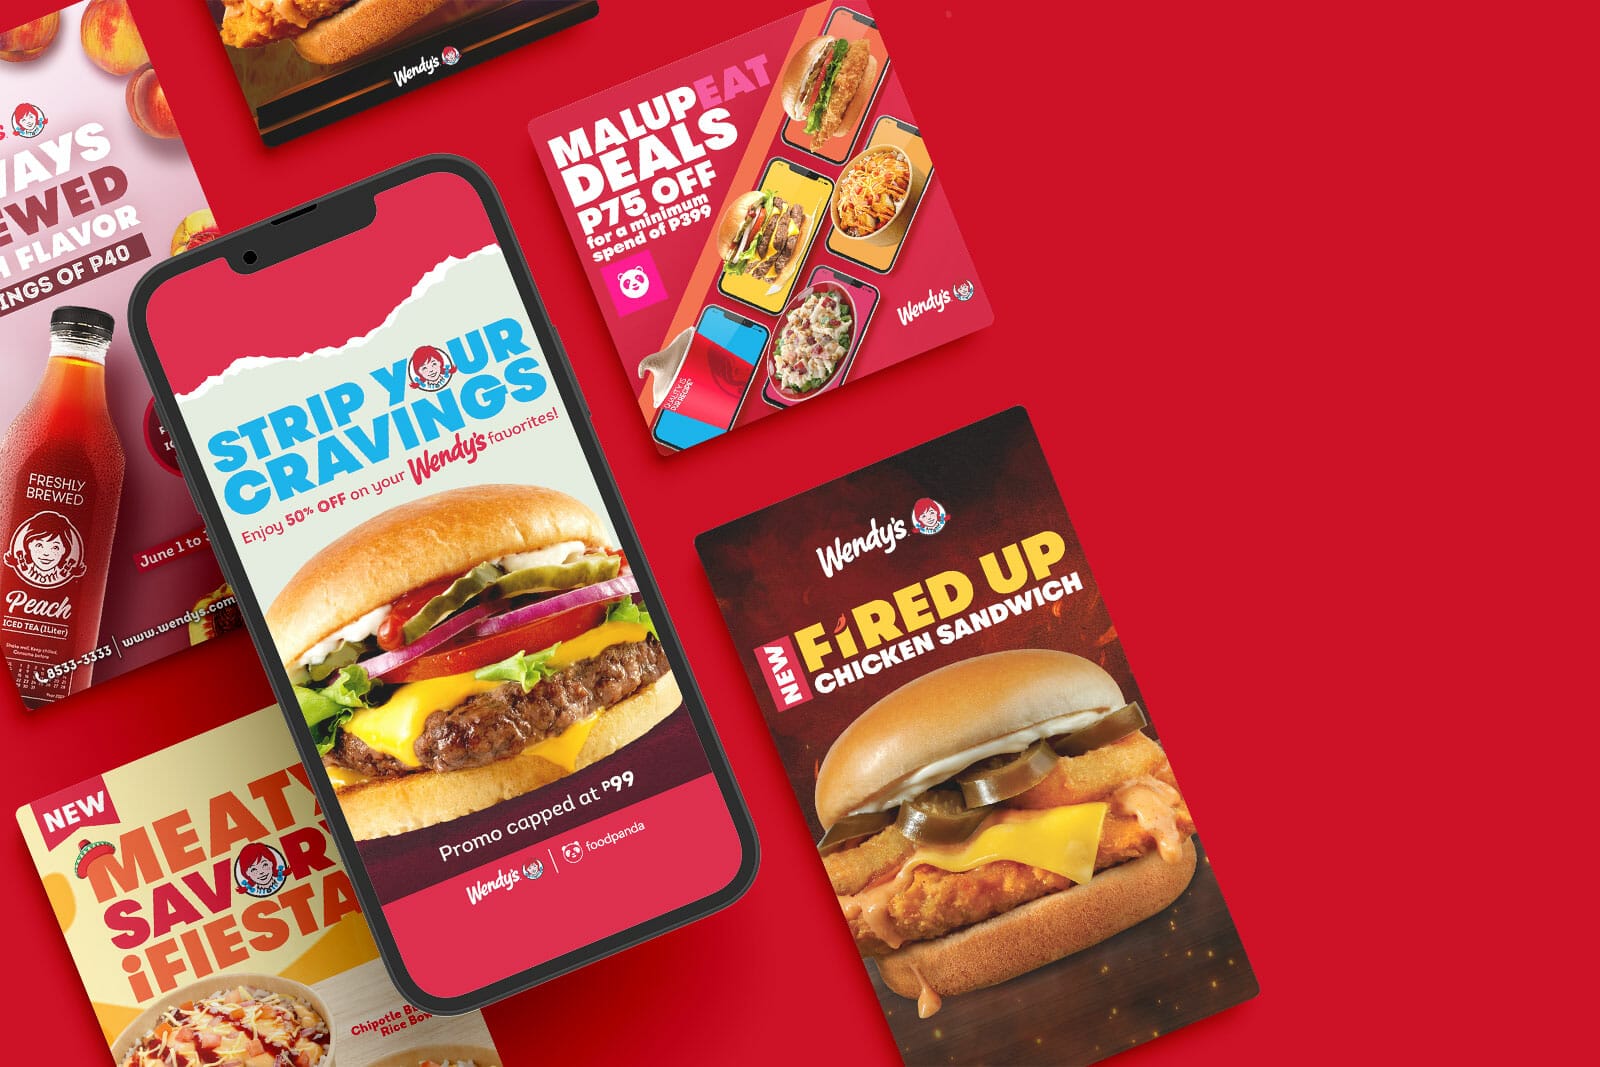 27.9M New Wendy’s customers reached, engaging 1.4M users across social media for 2022